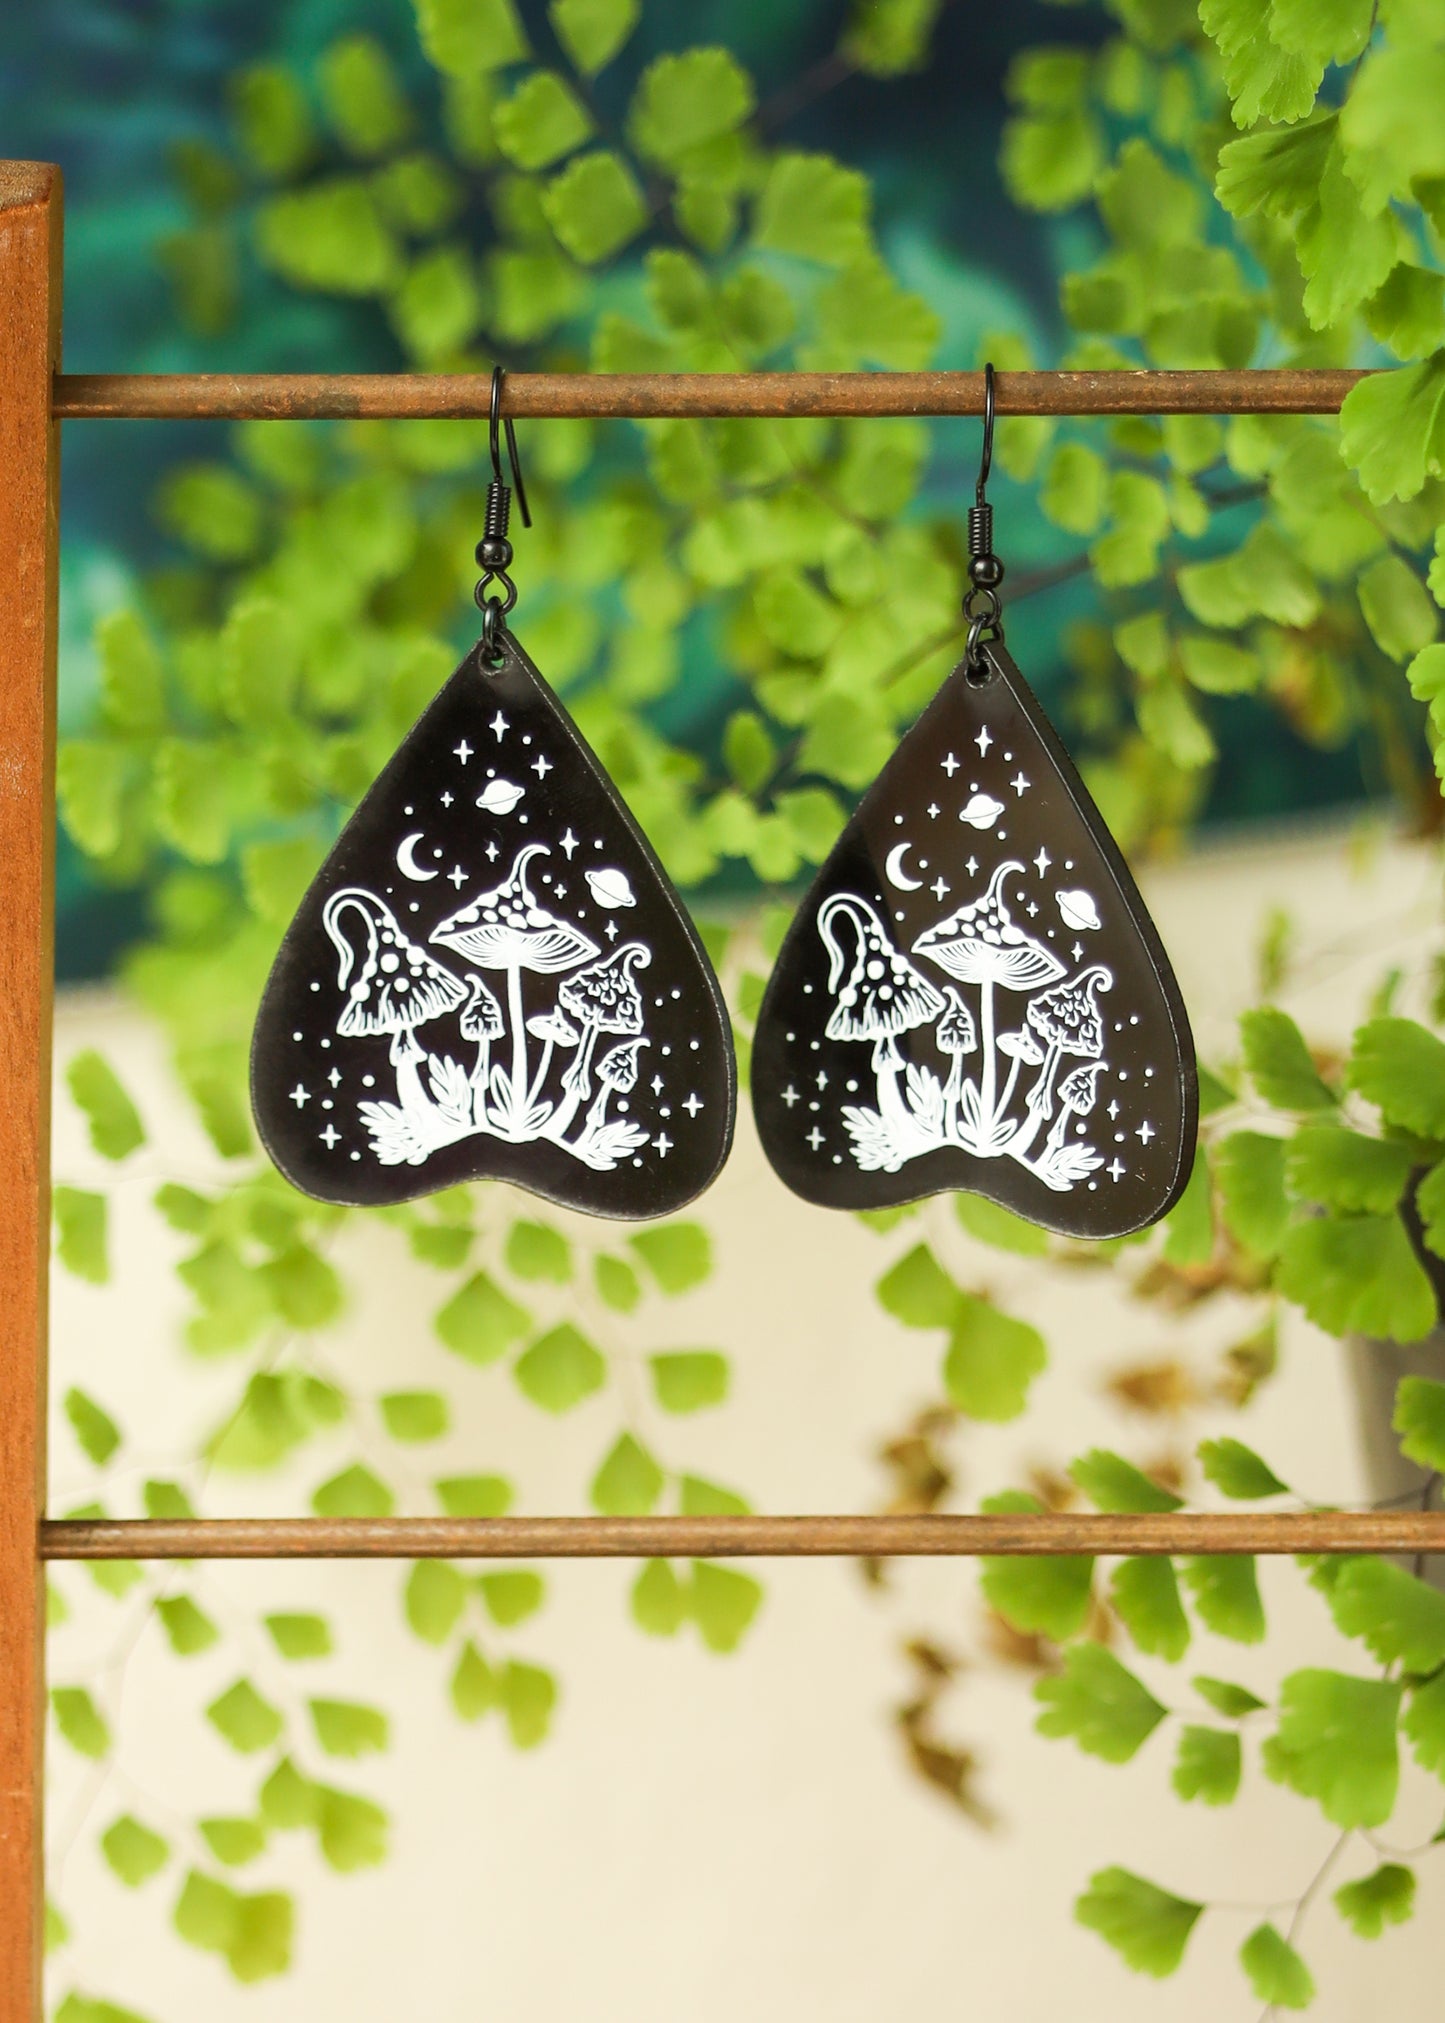 Black Acrylic Earrings | Trippy Celestial Mushroom Jewelry | Witch Goth Psychedelic Fantasy Charm | Whimsical Mystical Planchette Dangles